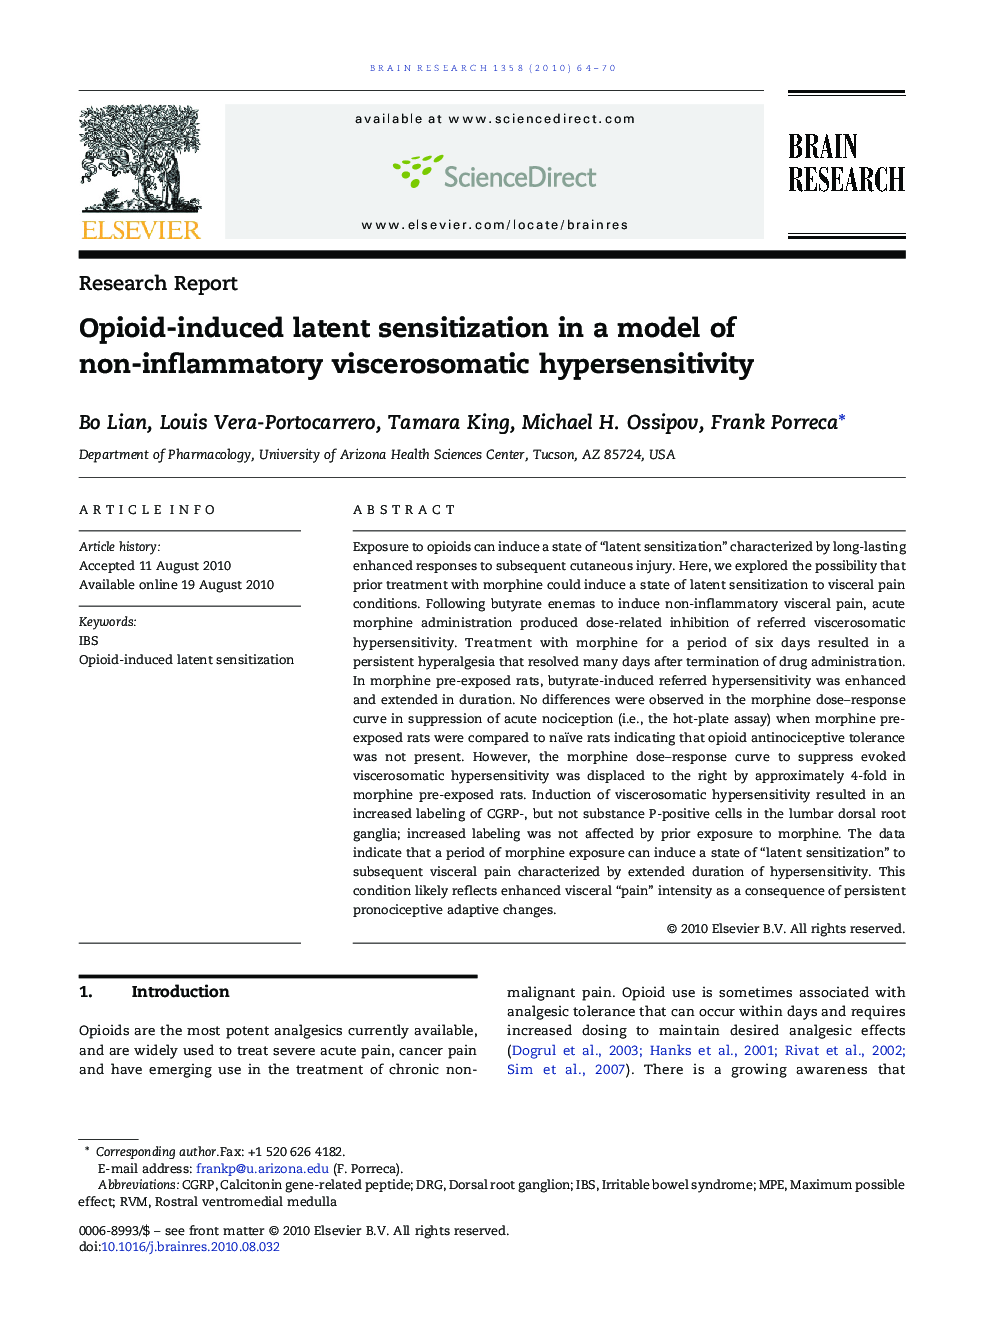 Research ReportOpioid-induced latent sensitization in a model of non-inflammatory viscerosomatic hypersensitivity